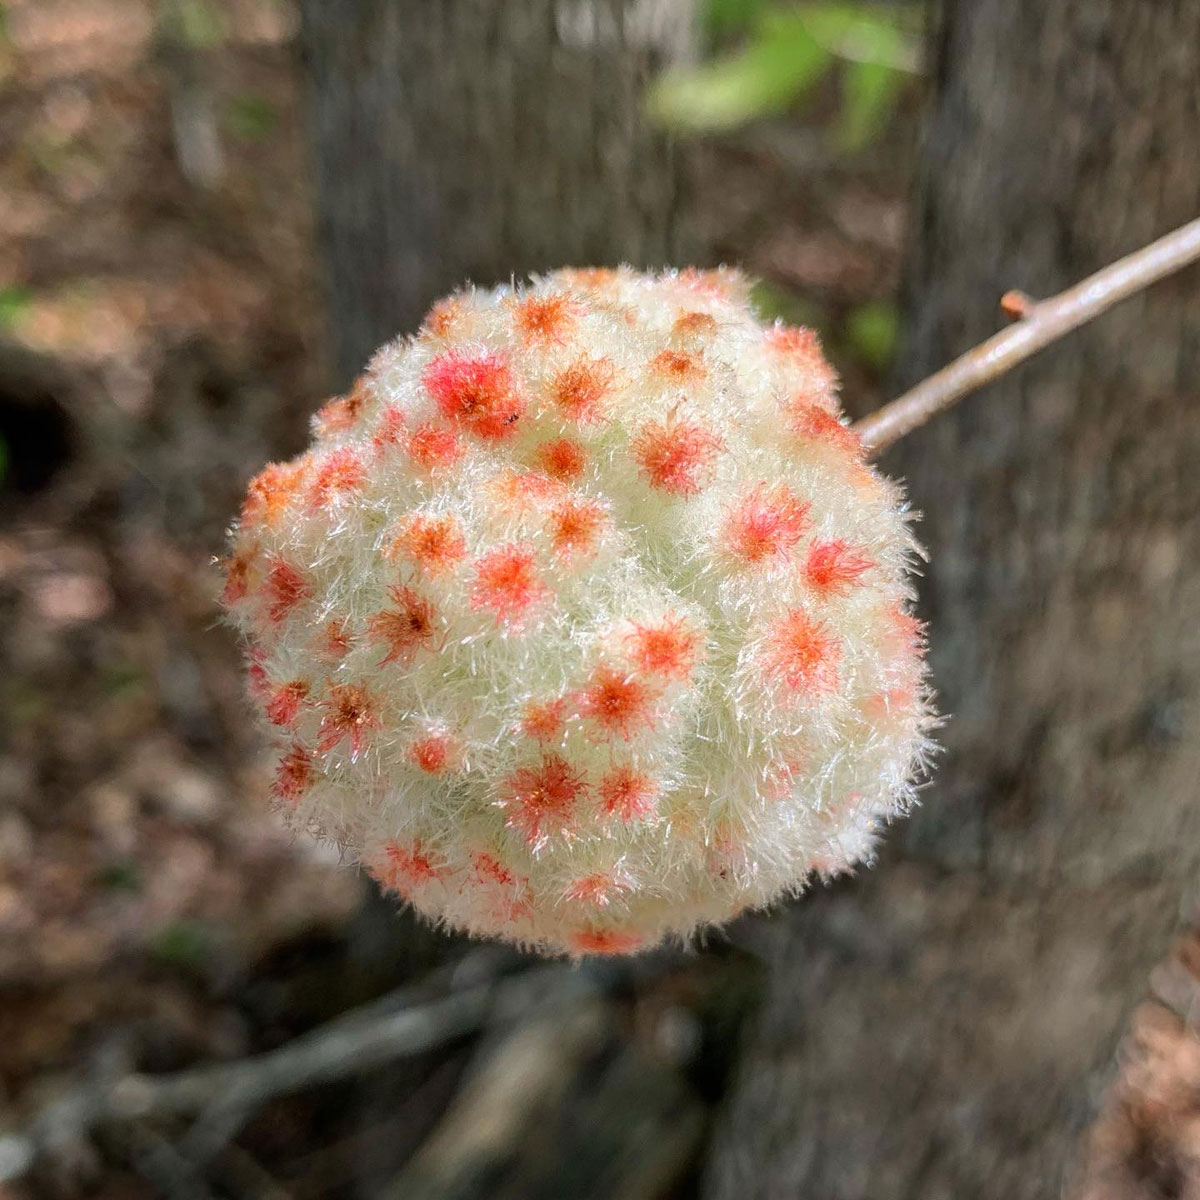 Light green, pink and orange fuzzy ball on branch